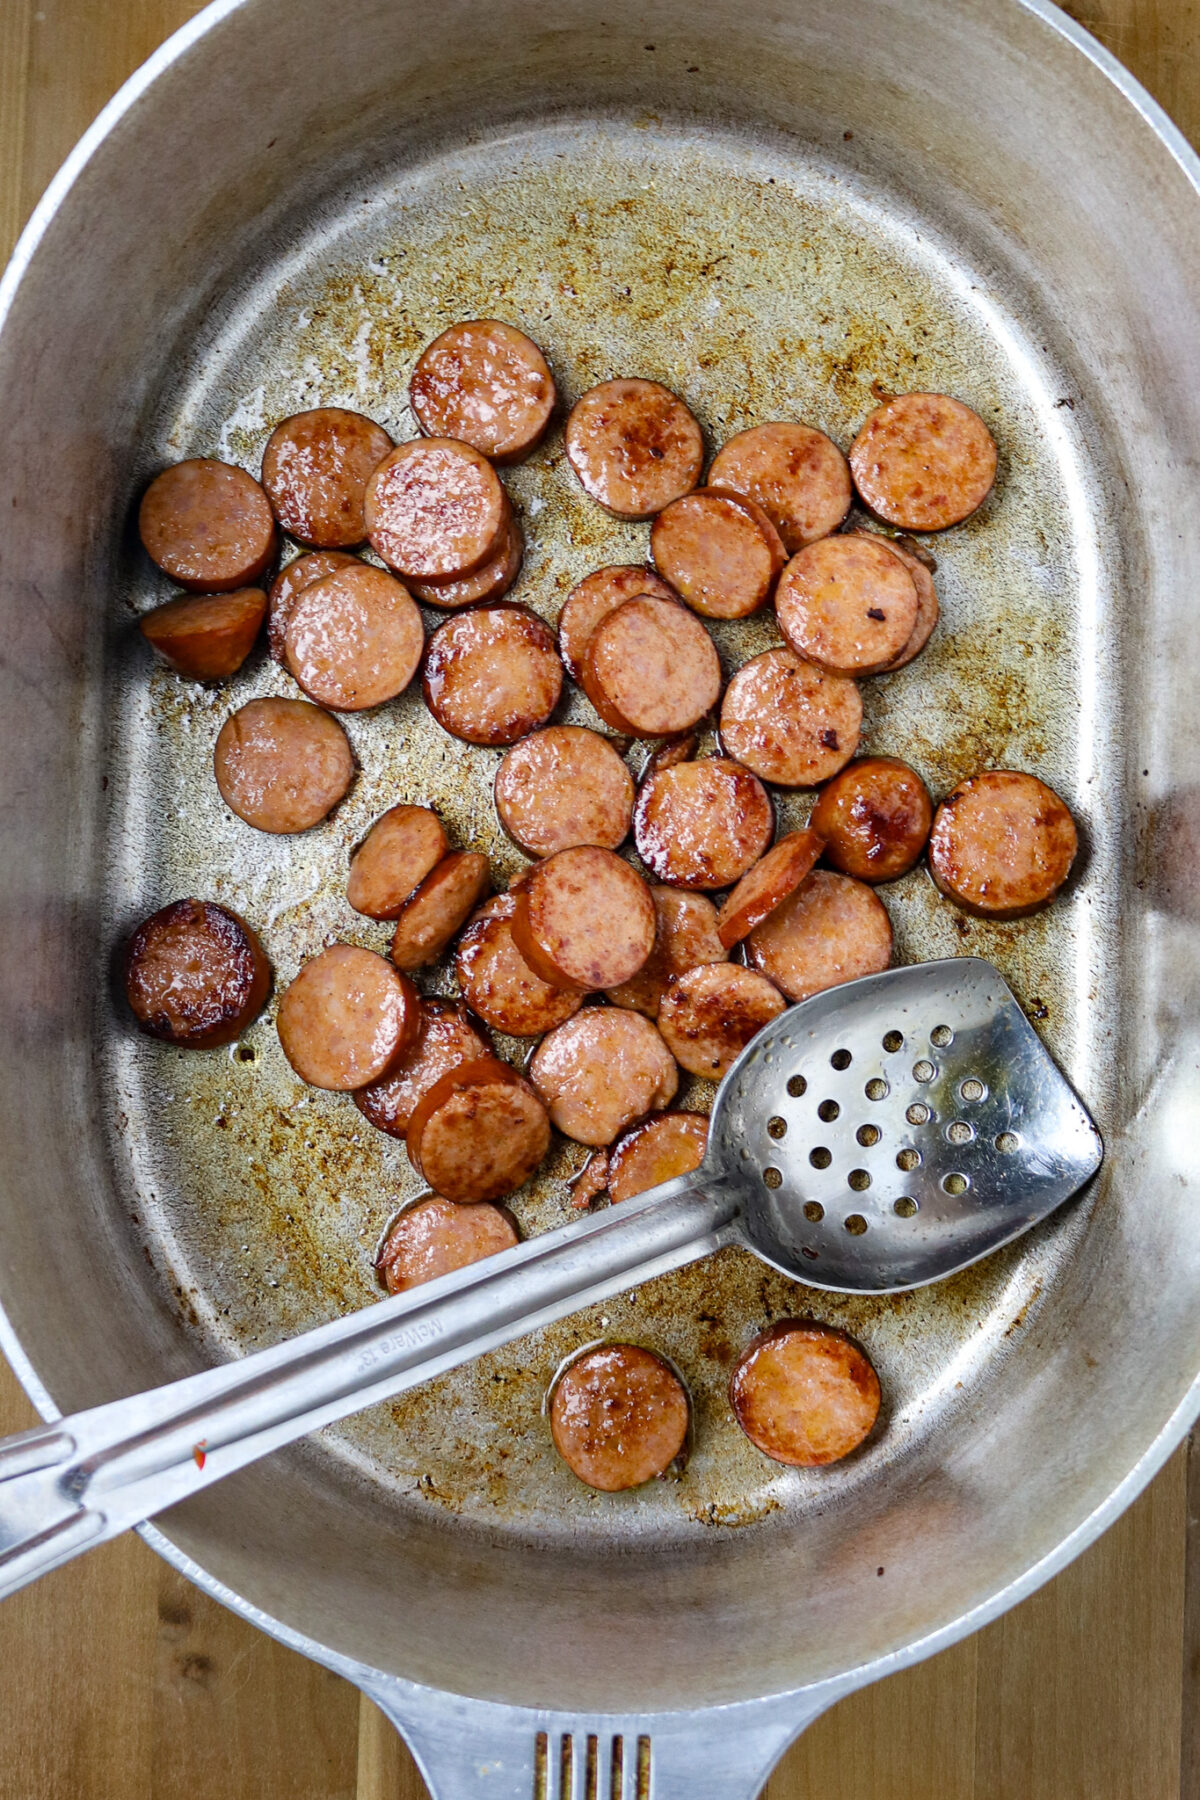 Slices of smoked sausage browned in a large silver pot with a slotted spoon in it.